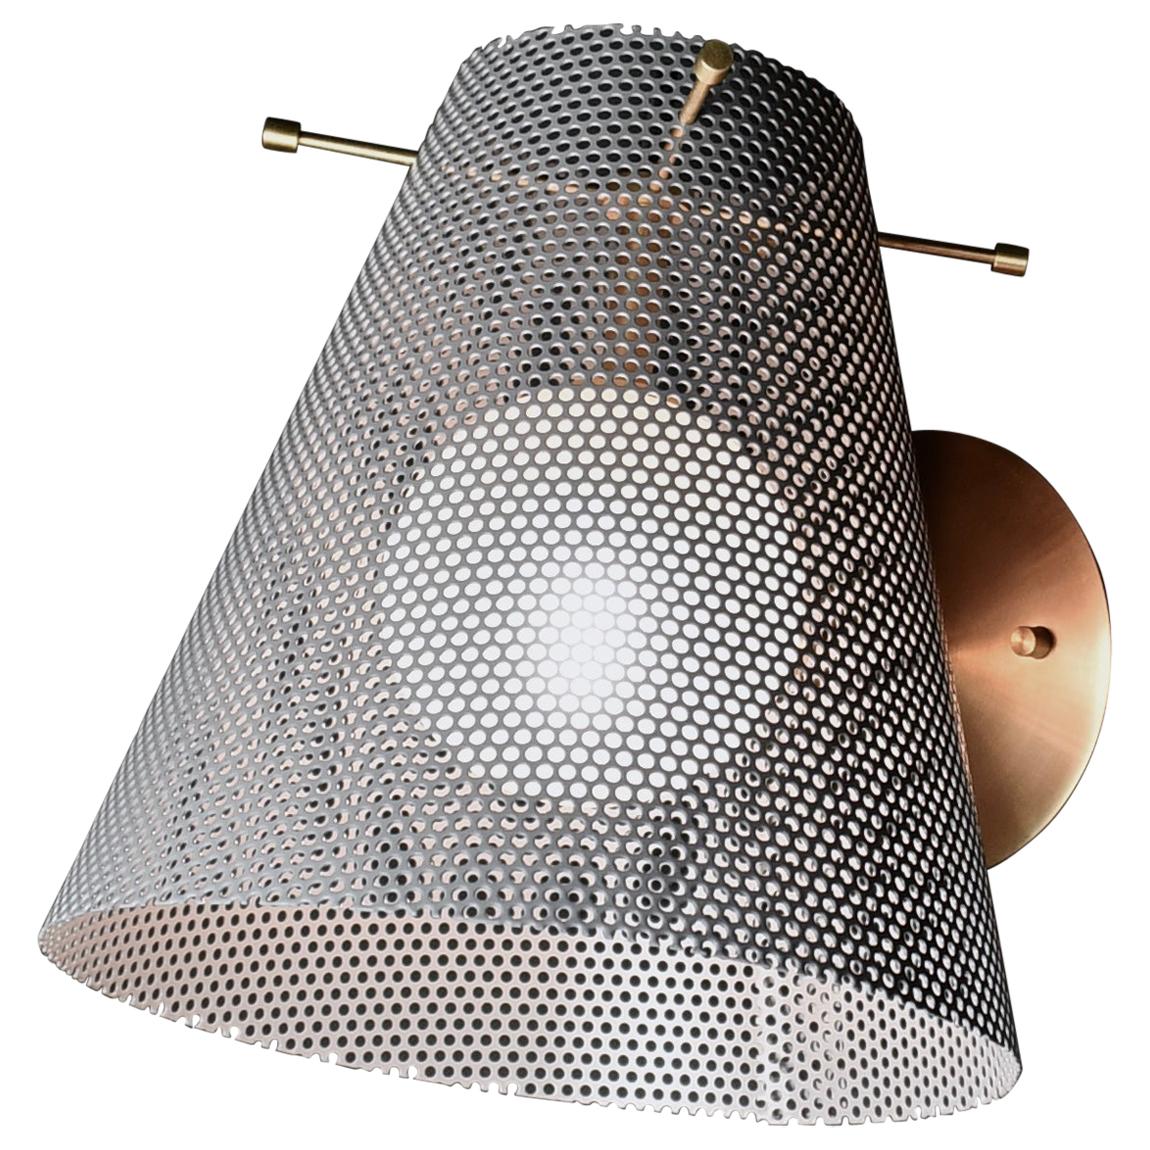 Voile Wall Sconce in Brass and Gray Enamel Mesh by Blueprint Lighting